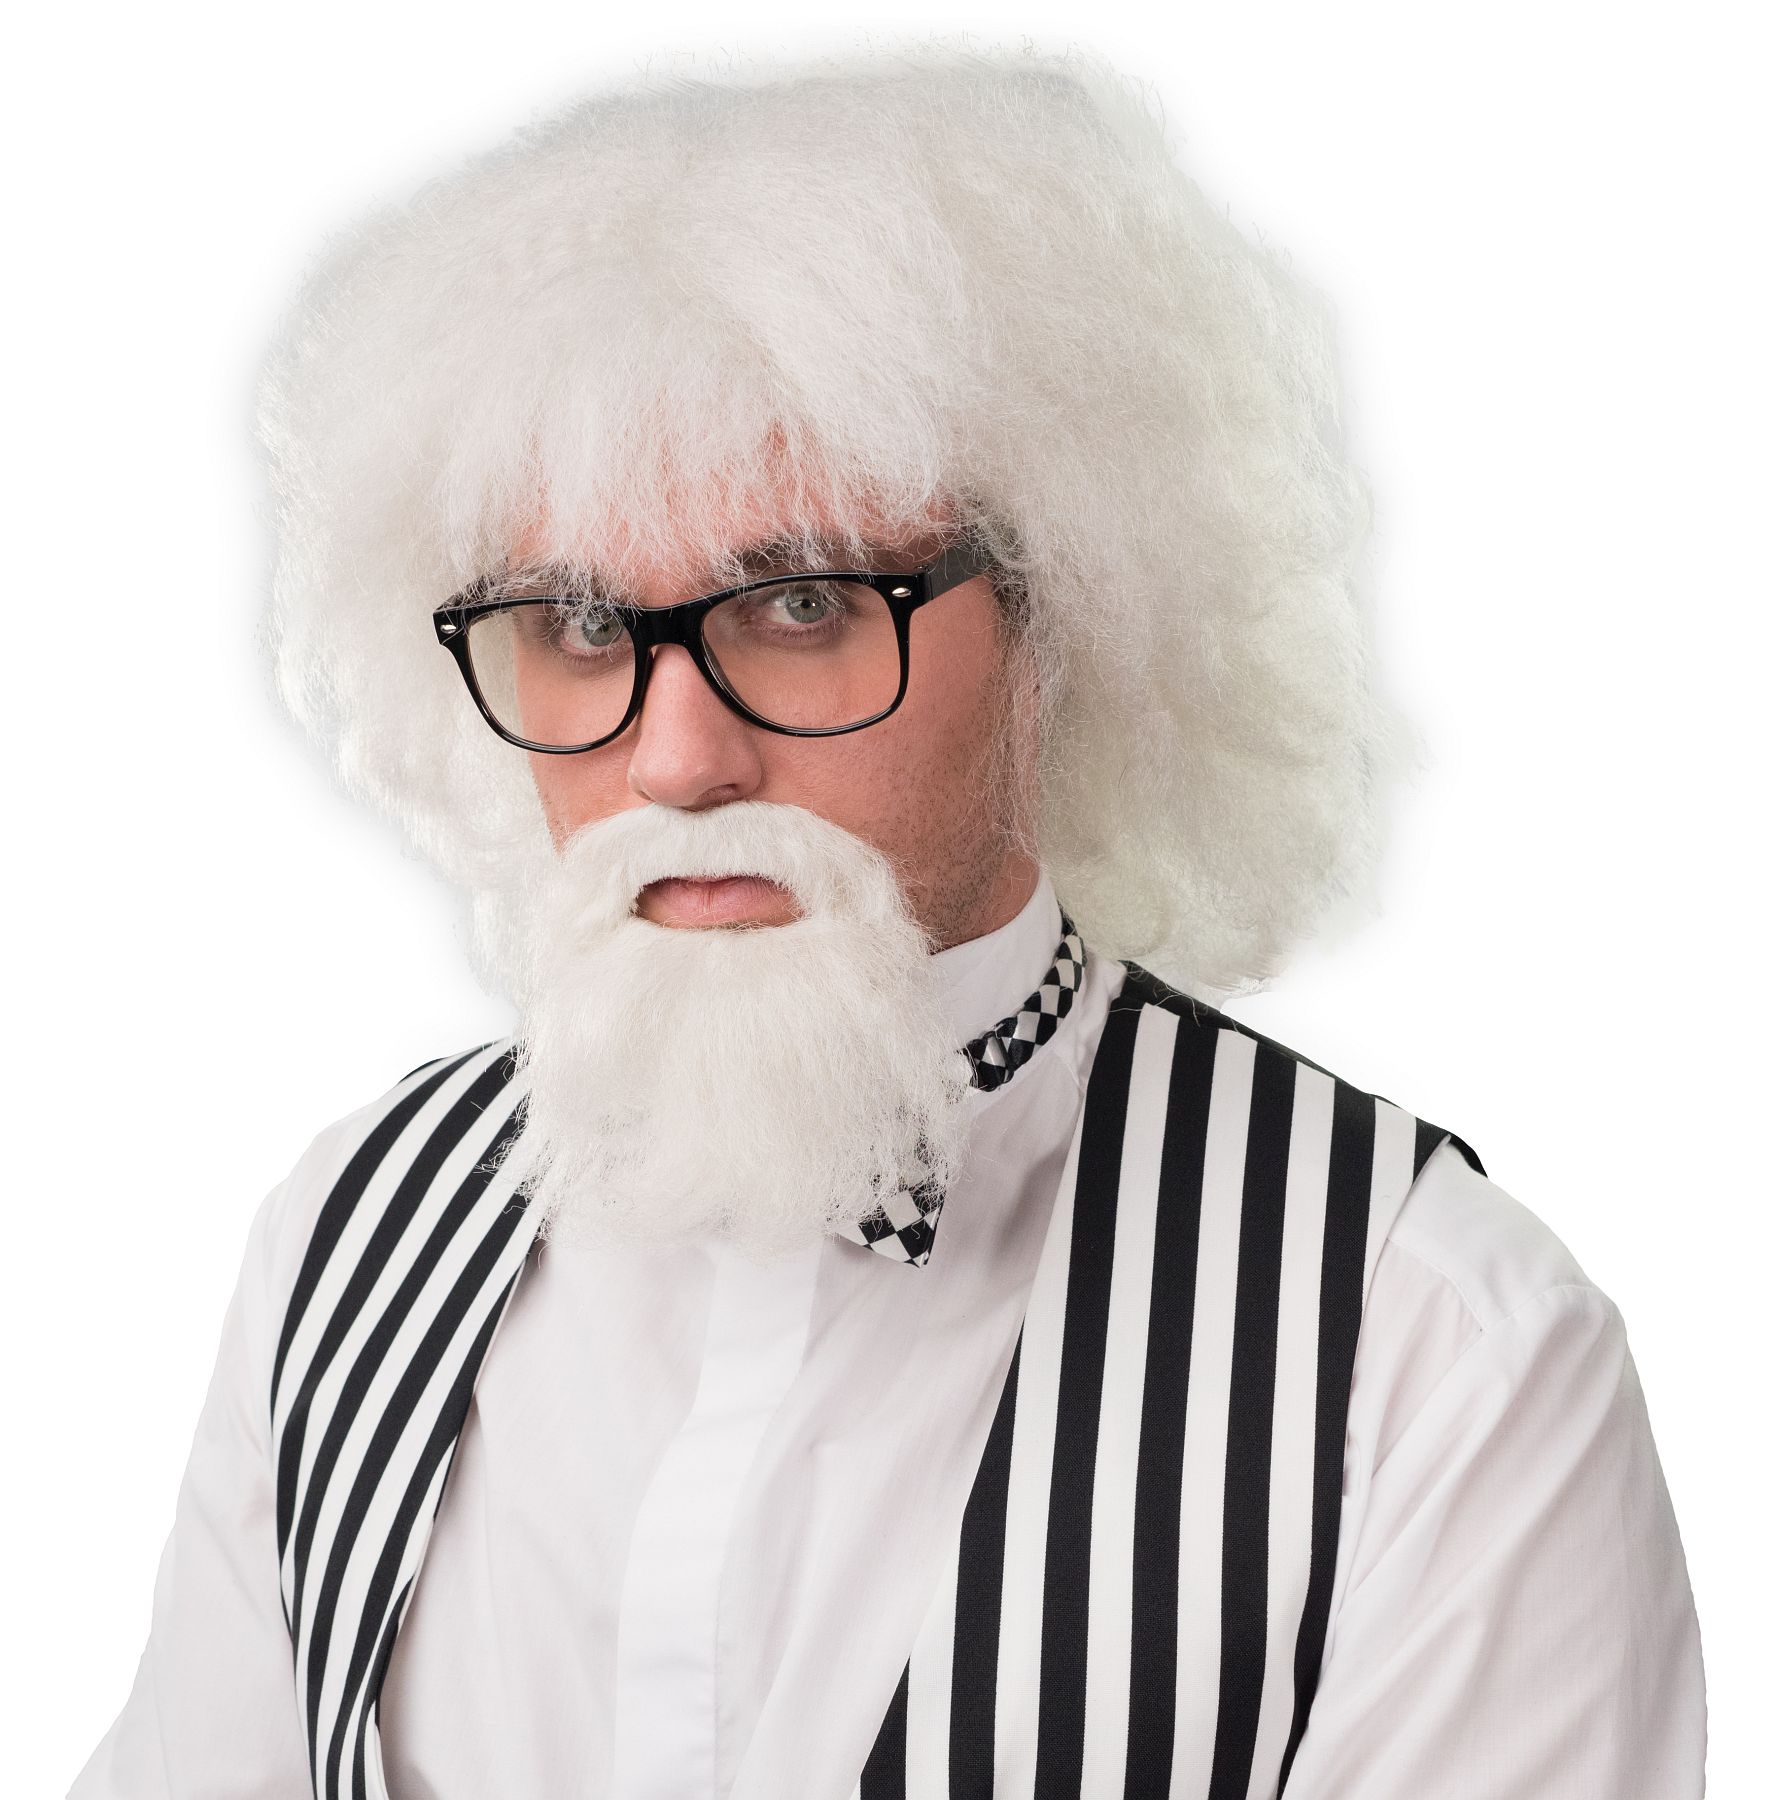 Men's wig, white with glasses and beard